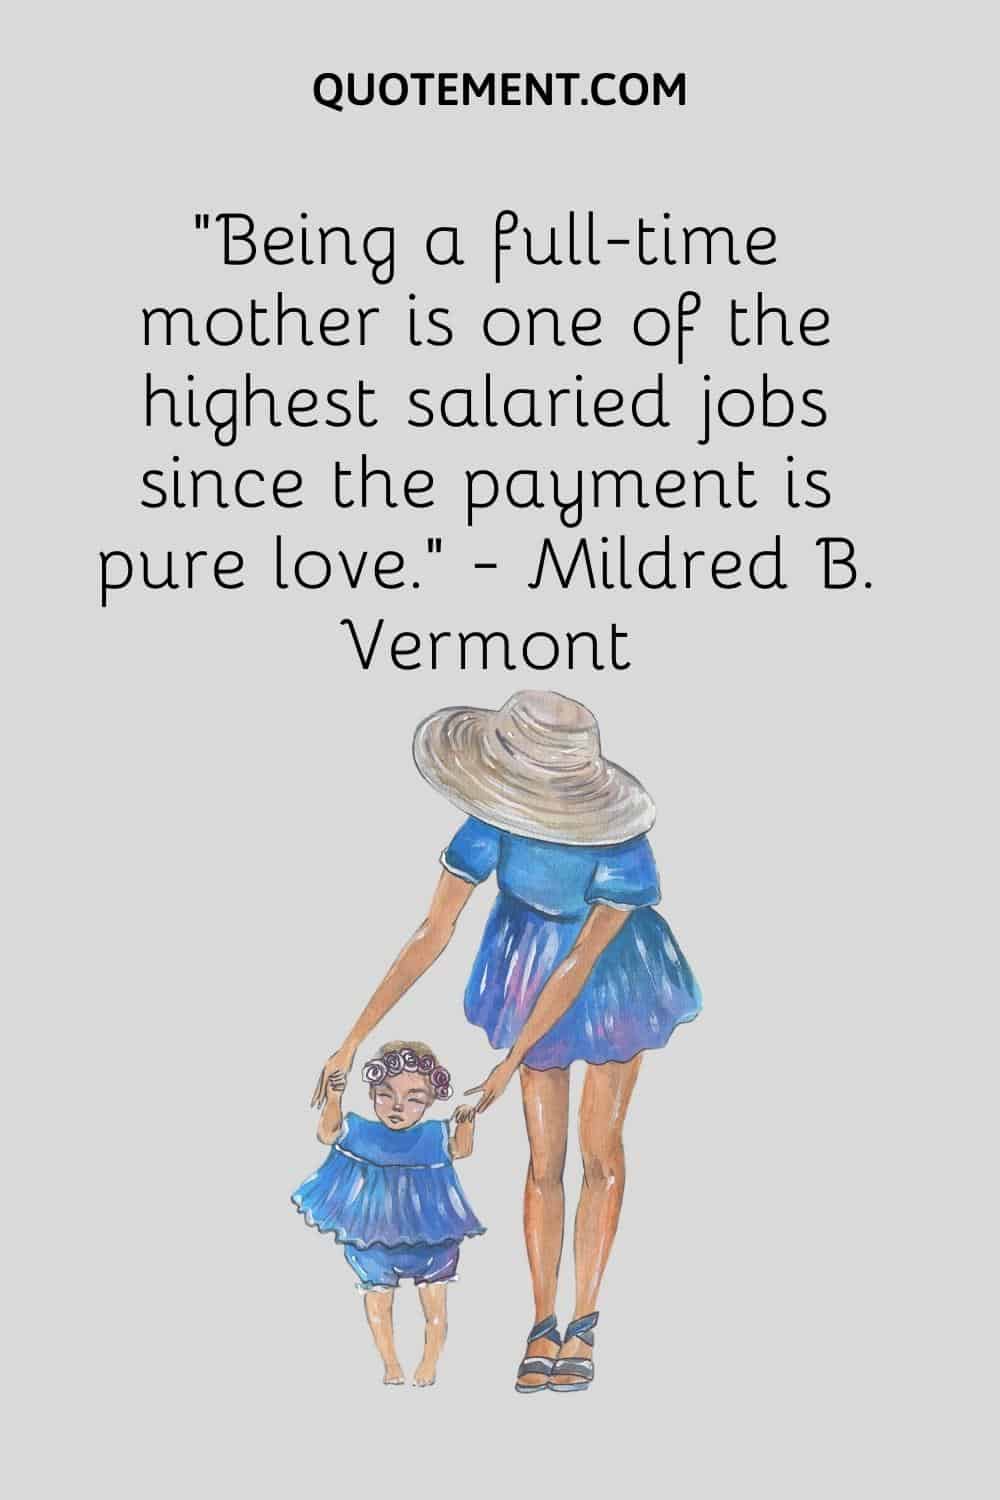 “Being a full-time mother is one of the highest salaried jobs since the payment is pure love.” — Mildred B. Vermont